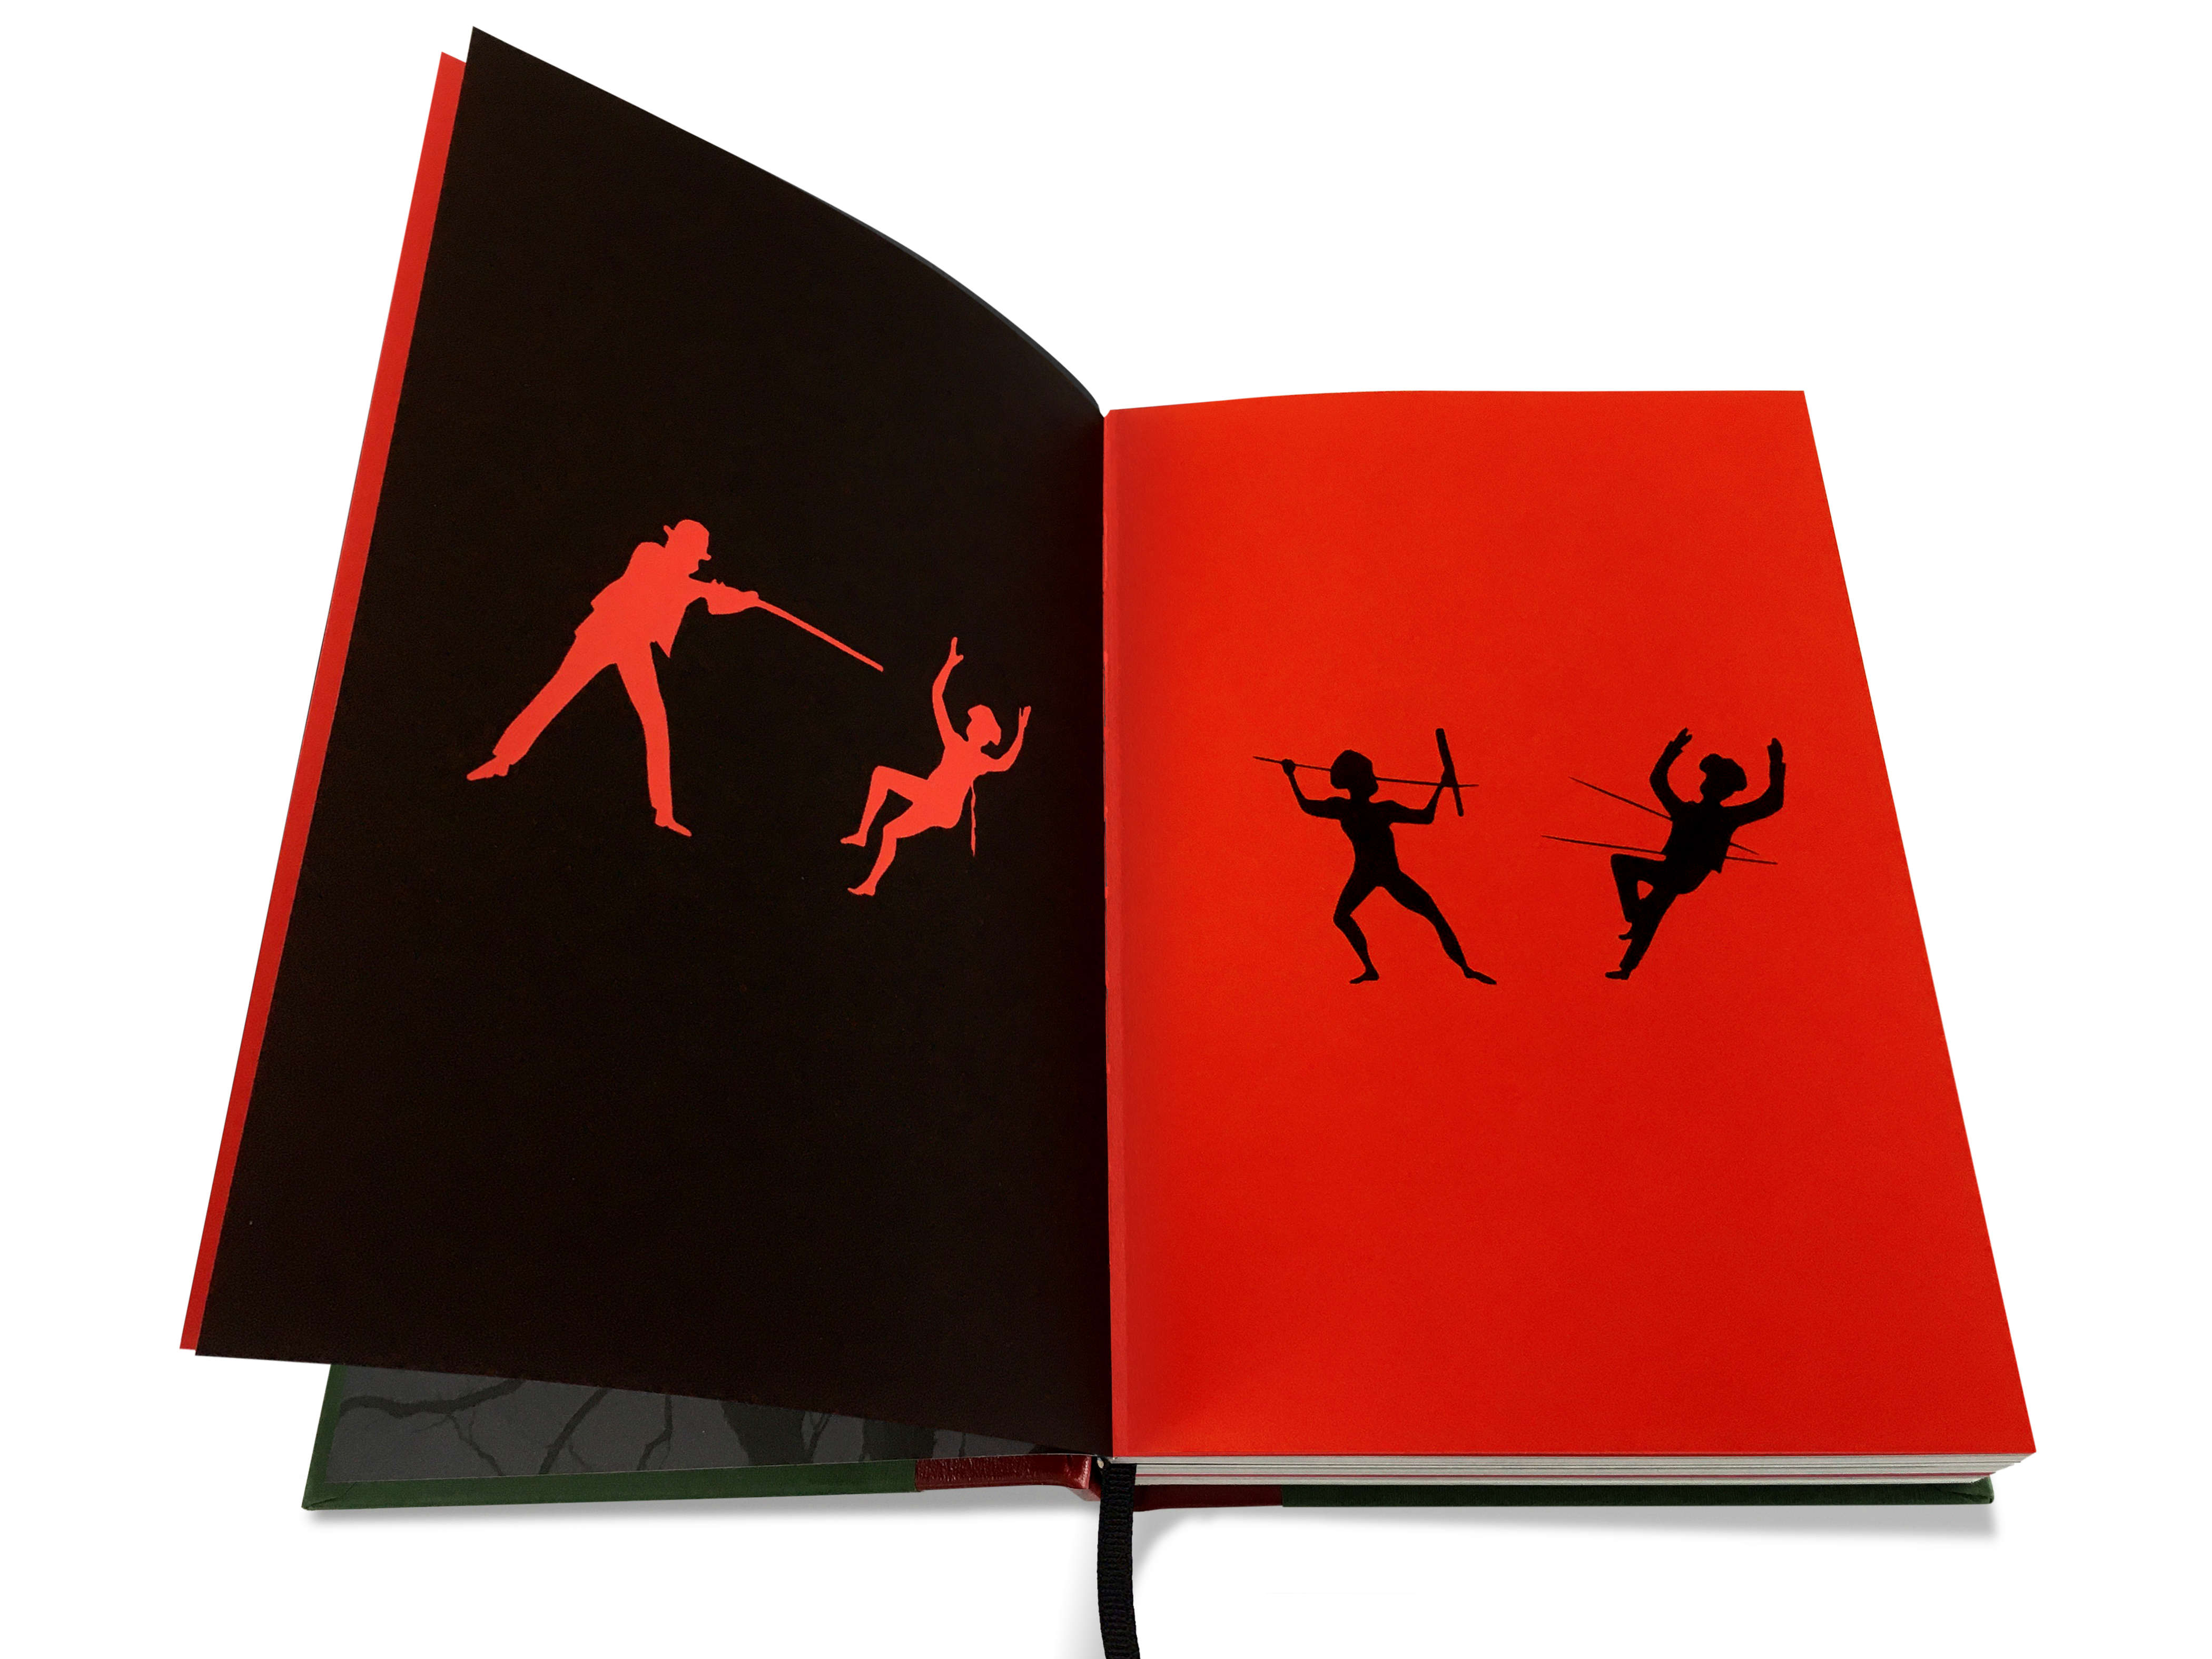 Image of a double-page spread from the TENSE PAST book. The left-hand page is black with two red silhouette figures. The left-hand figure is of a colonialist with a gun shooting the right-hand figure, an Aboriginal man who is falling backwards. The right-hand page is red two black silhouette figures. The left-hand figure is of an Aboriginal man holding a spear and a club. The right-hand figure is a colonist who has two spears through his body and is falling backwards.